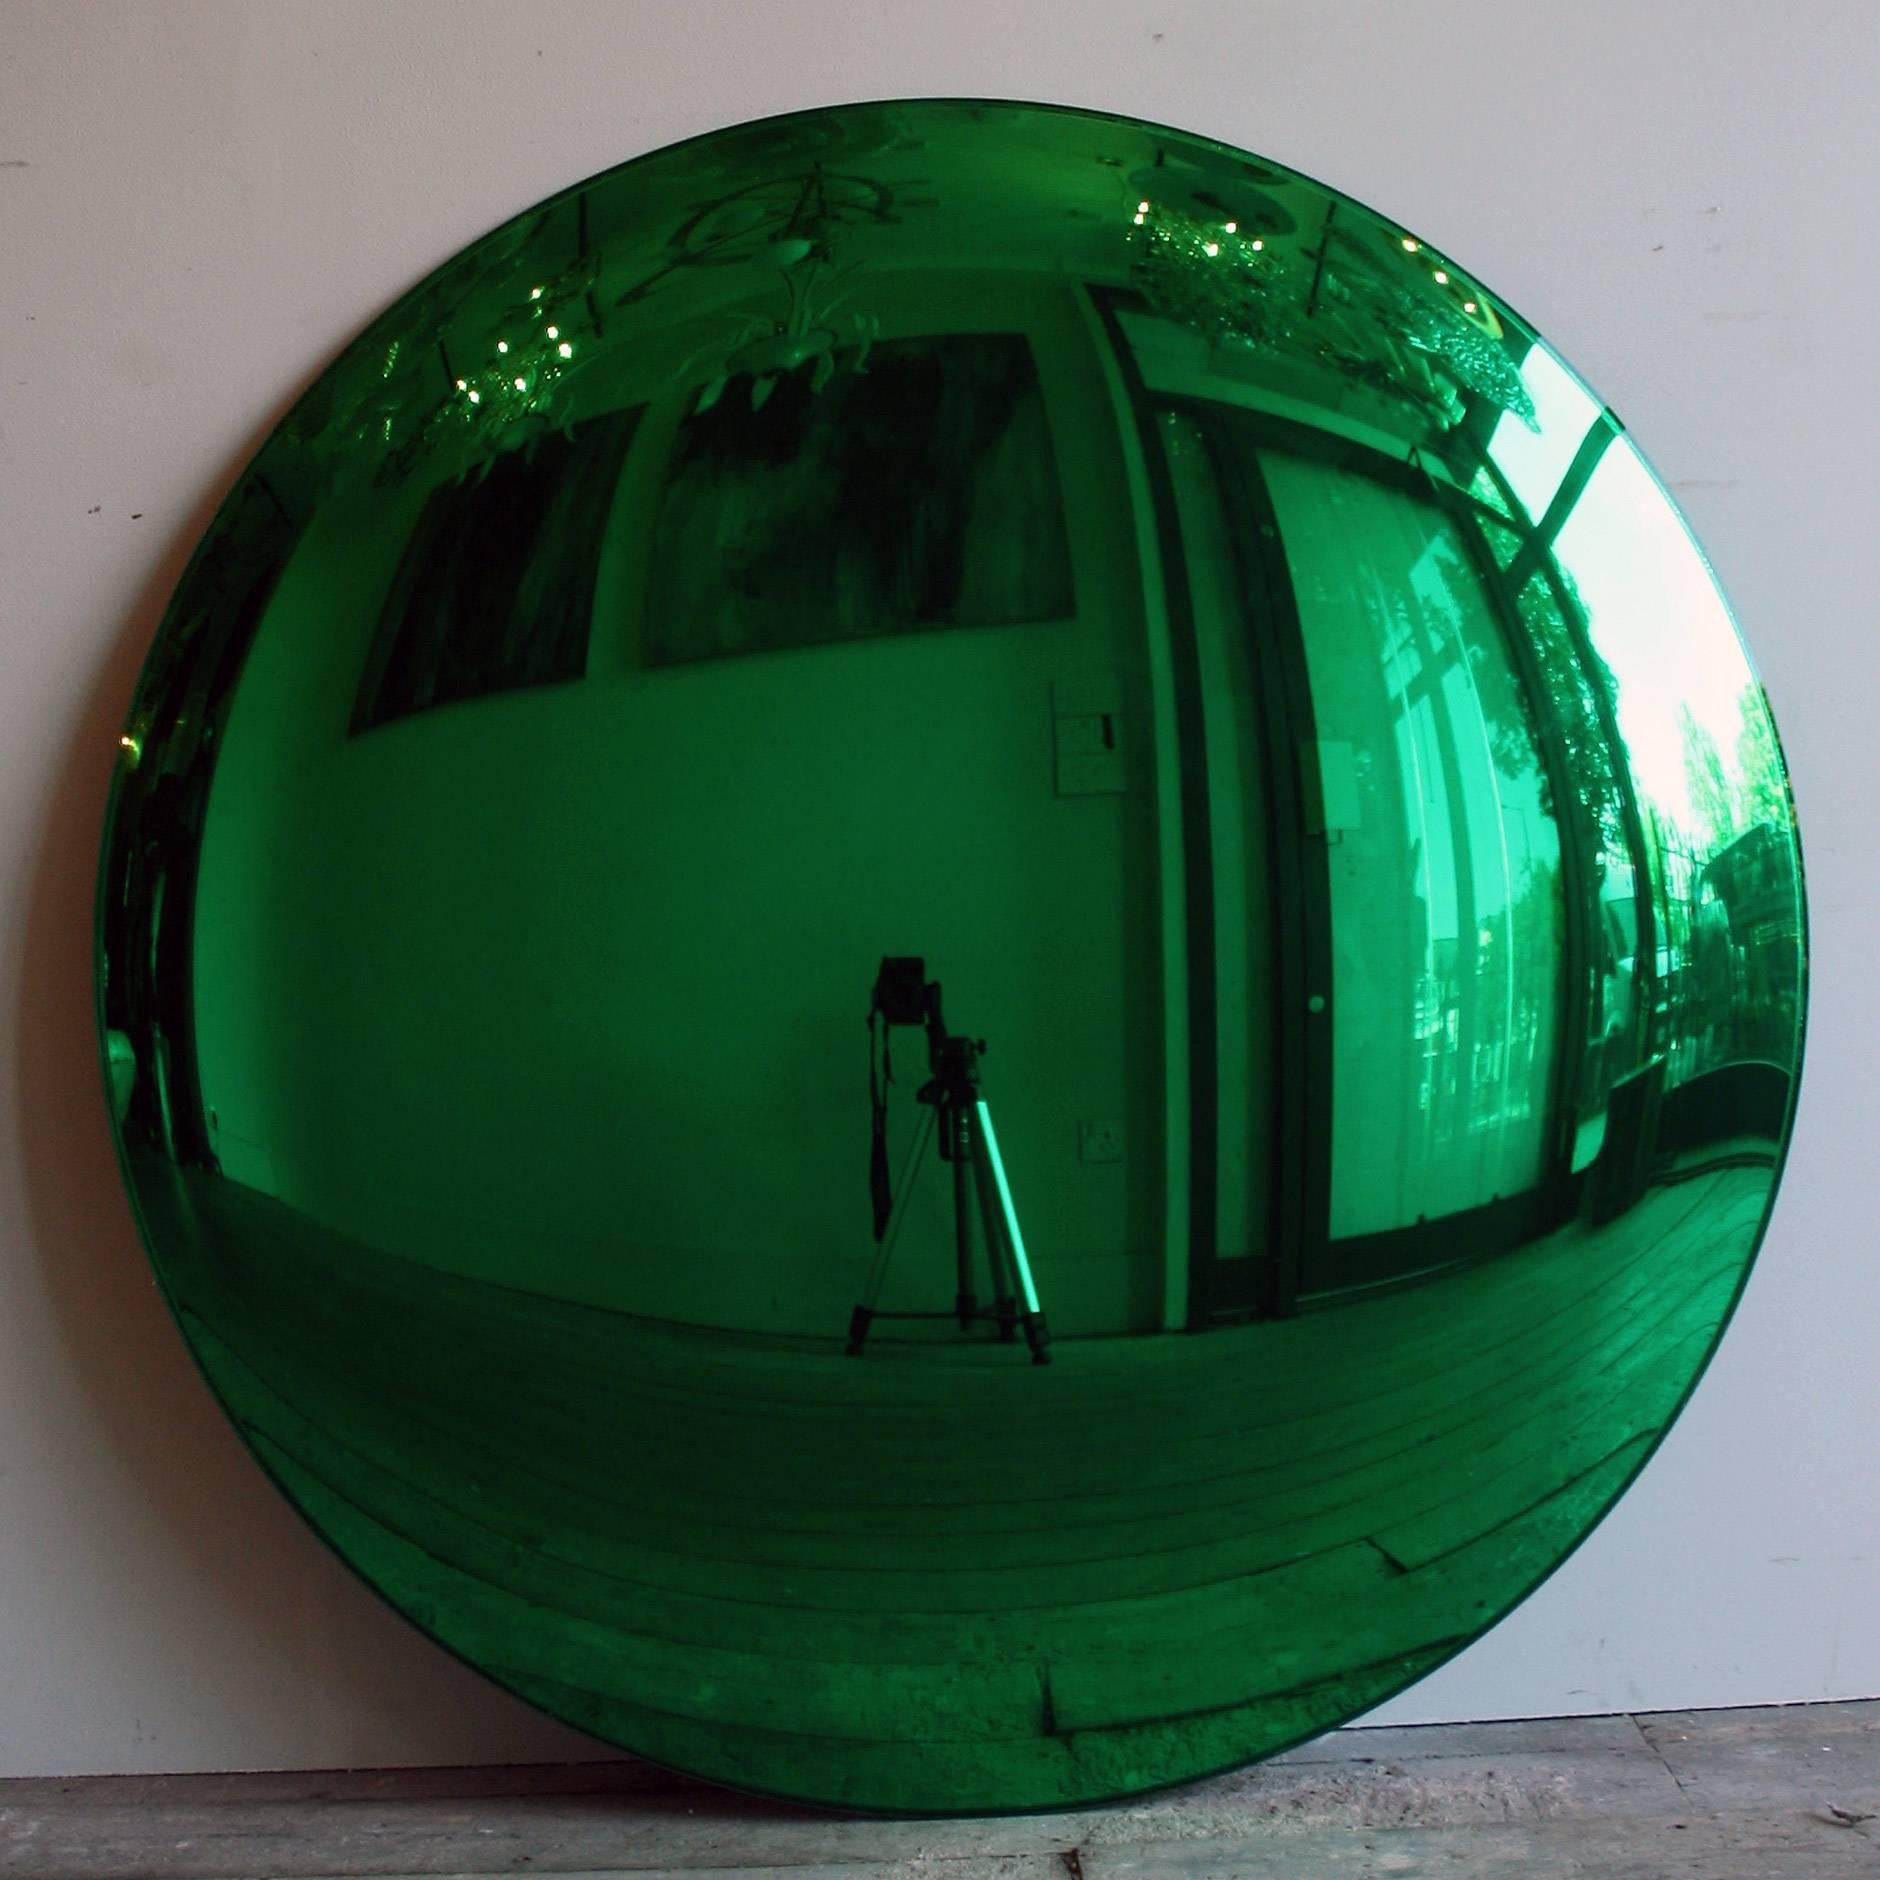 A large Green convex mirror 100cm in diameter with three bespoke clips for wall installation. A real statement piece!

All colour mirrors have a two - three week lead time as all made to order.

As each mirror is bespoke made, will need 50% deposit